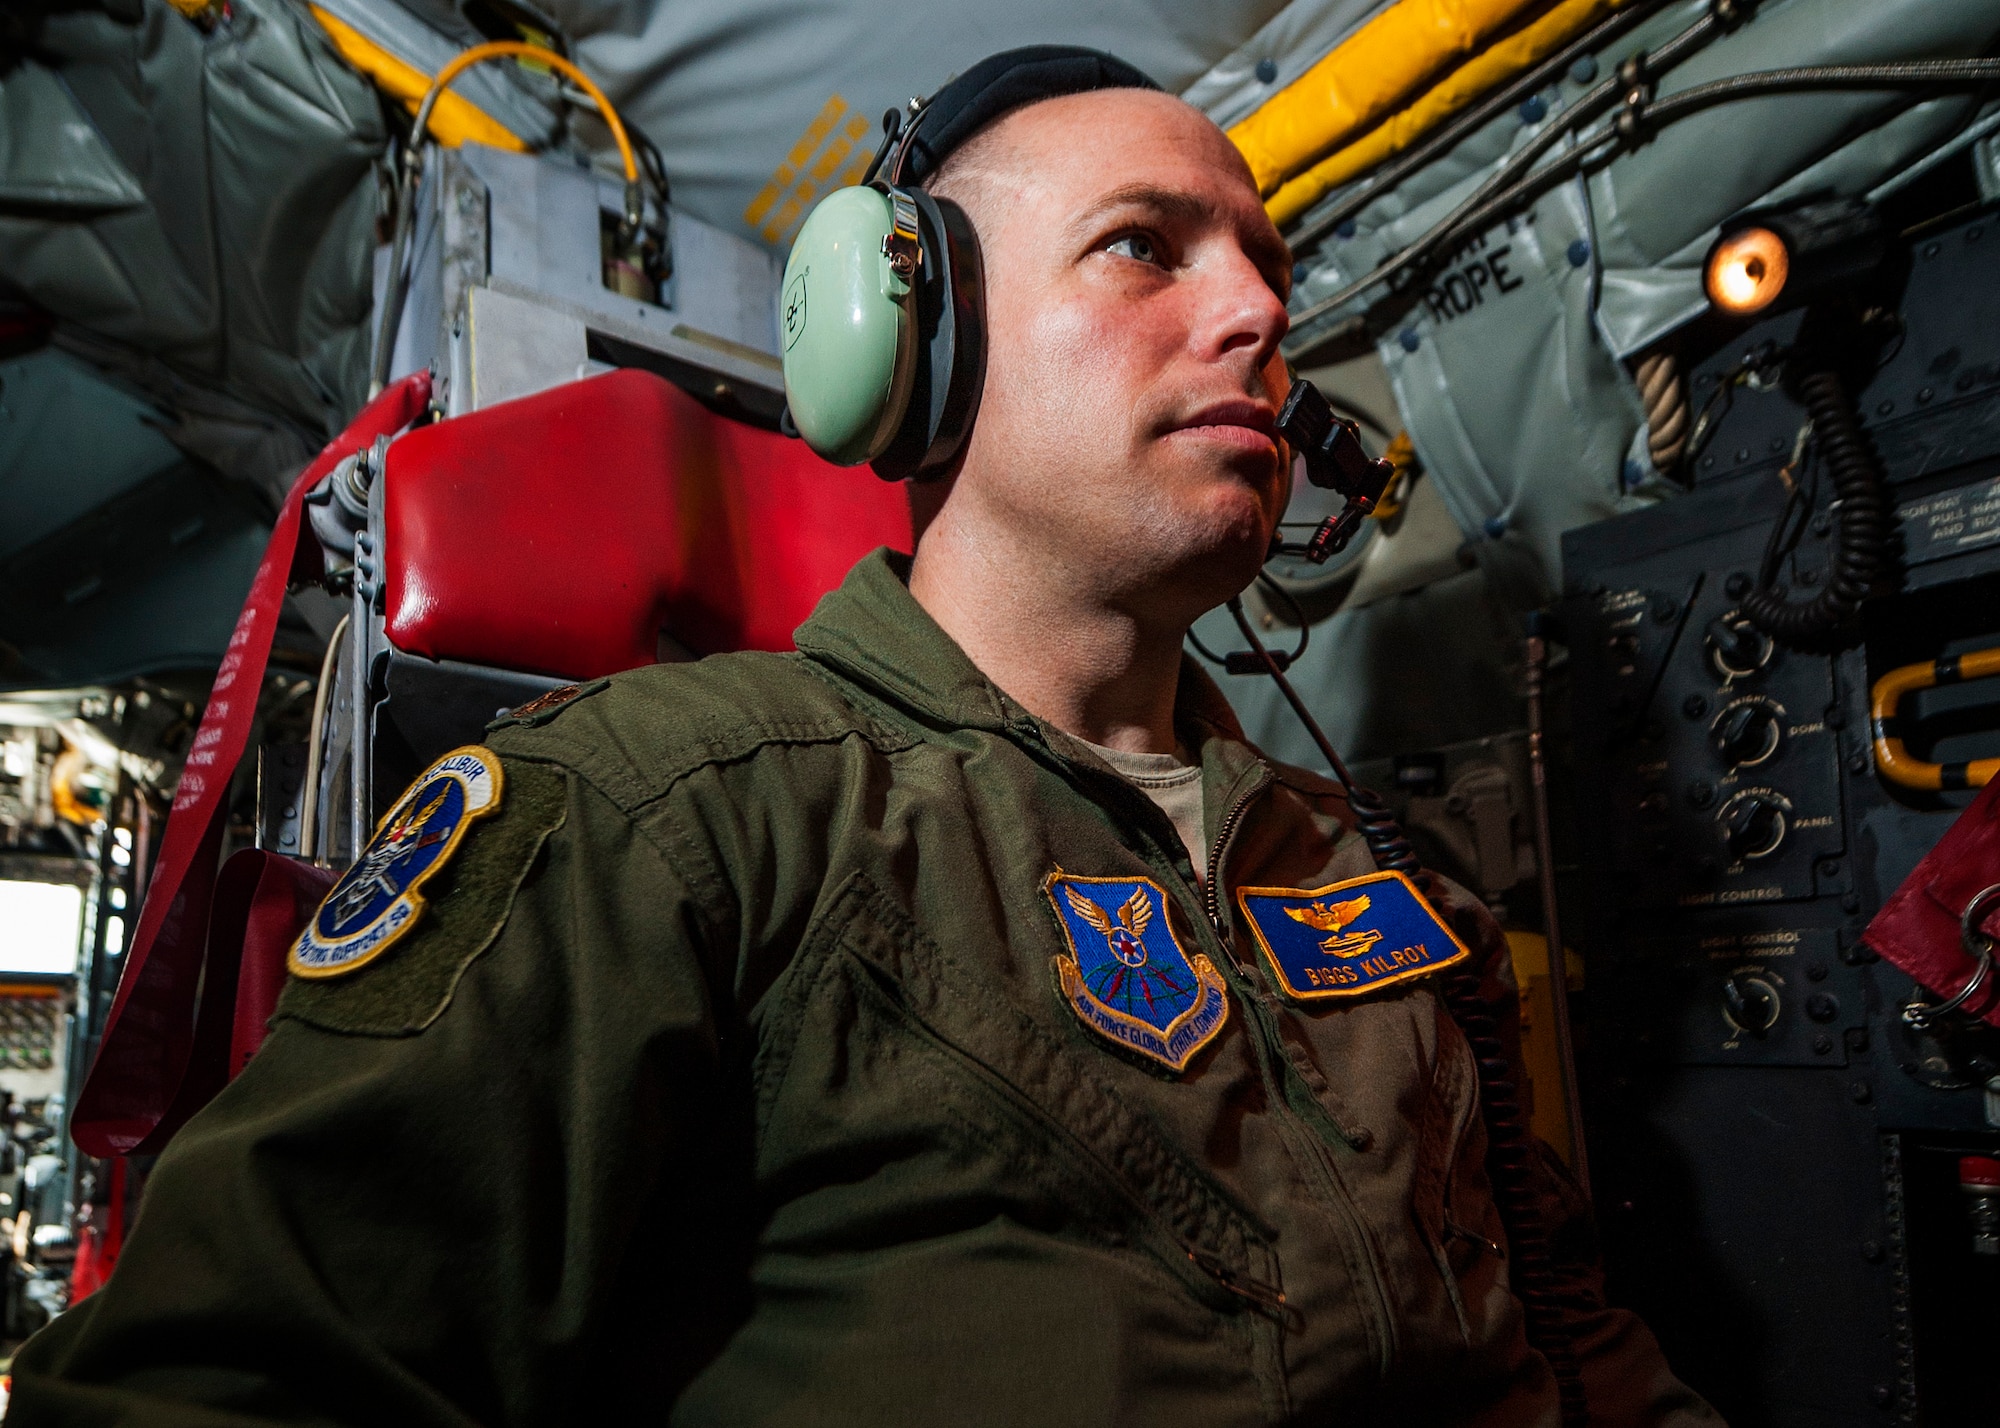 Maj. Raymond Kilroy, 5th Operation Support Squadron wing electronic warfare officer, speaks with ground crew from inside a B-52H Stratofortress during Combat Shield at Minot Air Force Base, N.D., July 12, 2017. Kilroy monitored and analyzed test radio frequencies generated by engineers on the ground. (U.S. Air Force photo/Senior Airman J.T. Armstrong)